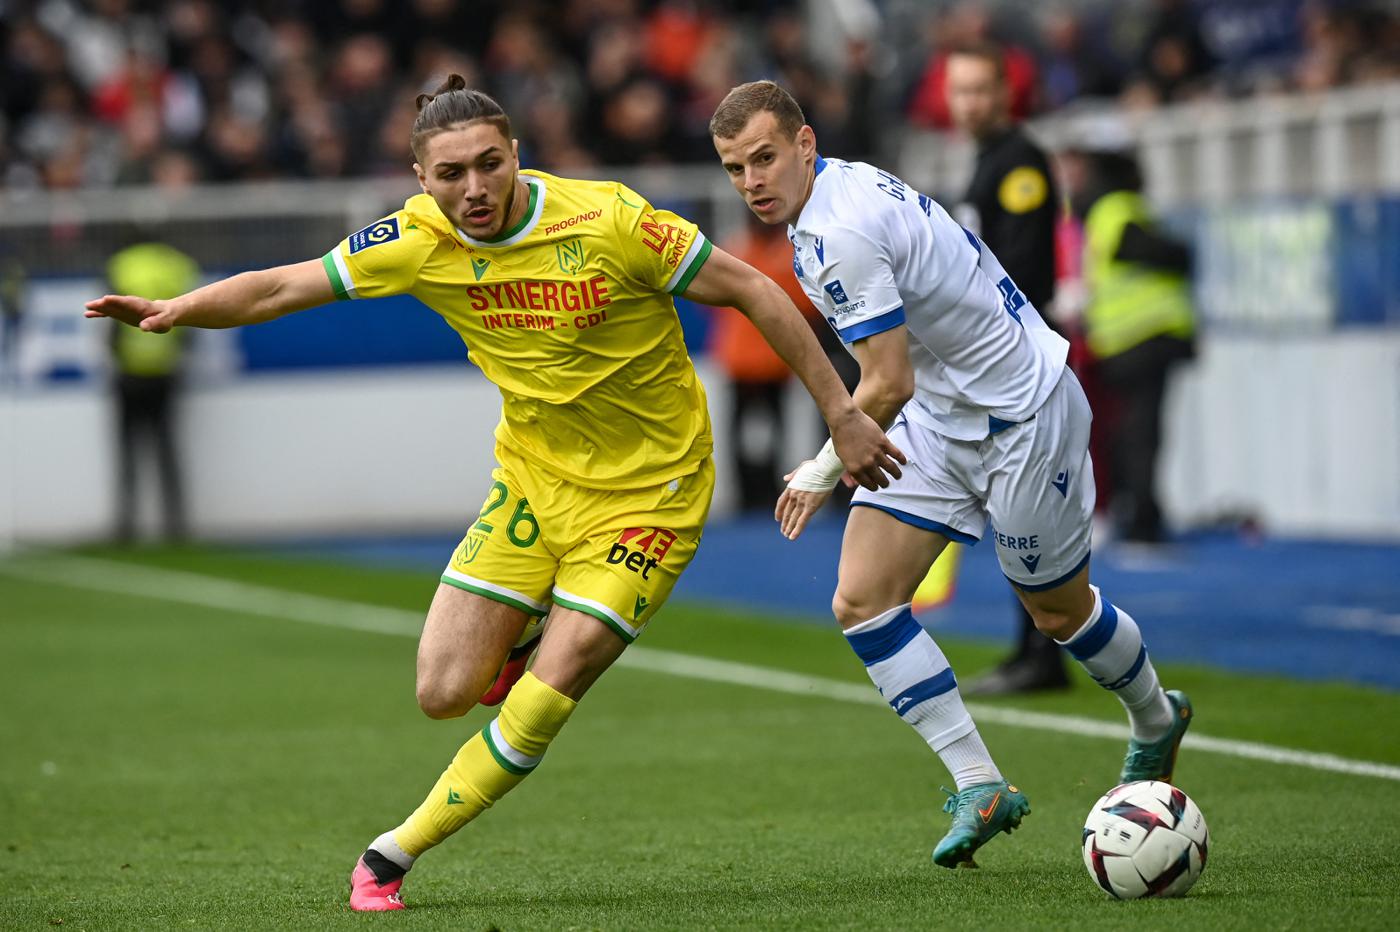 statistics Auxerre - Nantes - 2-1. French Championship, round 31. Match review,